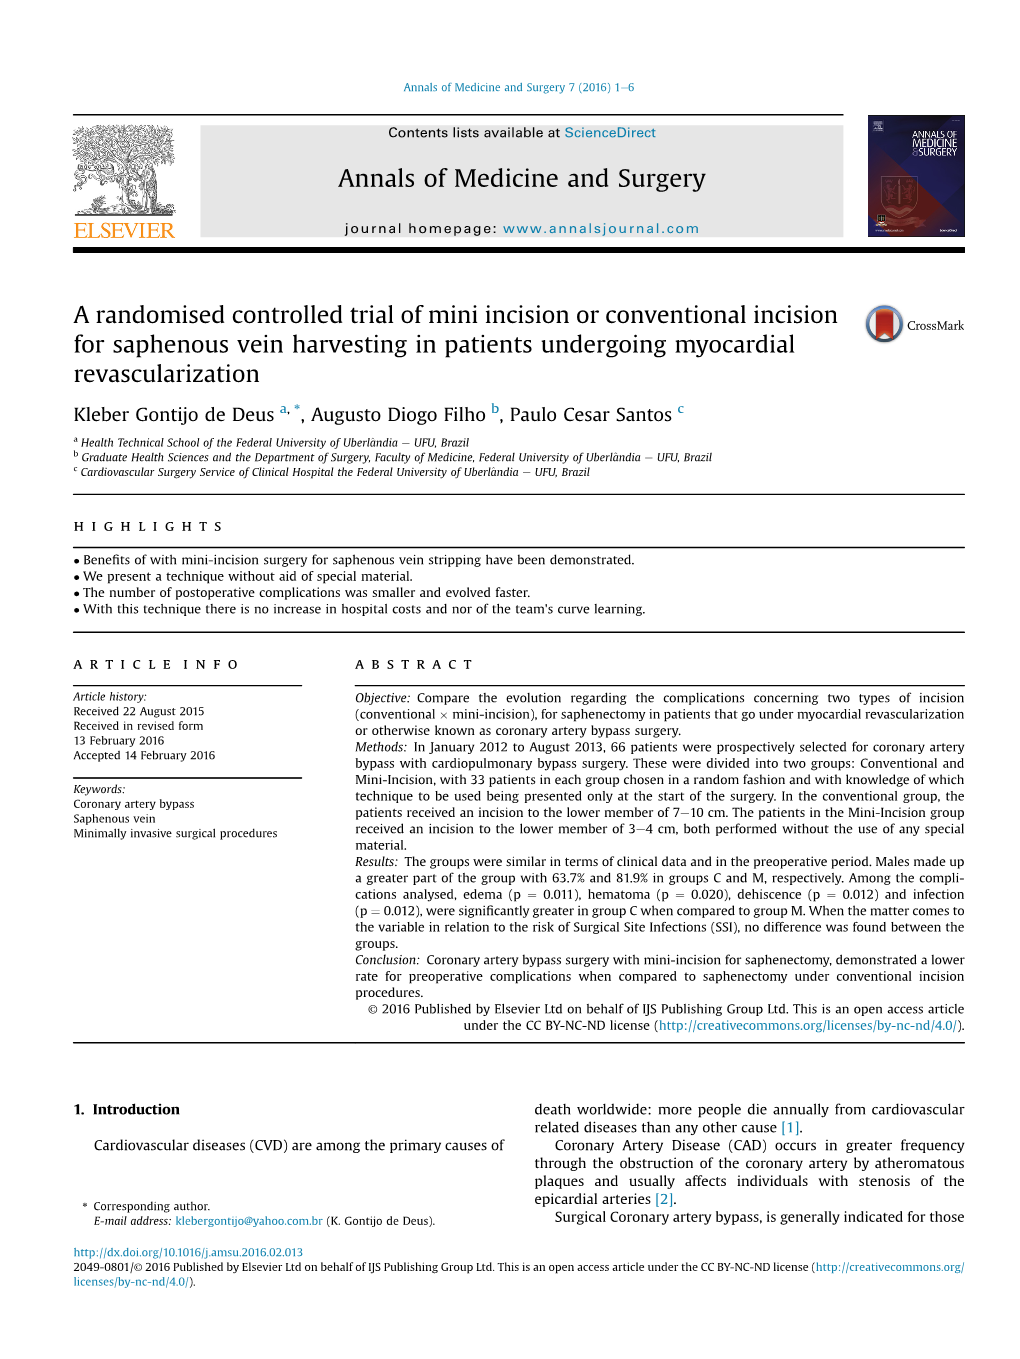 A Randomised Controlled Trial of Mini Incision Or Conventional Incision for Saphenous Vein Harvesting in Patients Undergoing Myocardial Revascularization